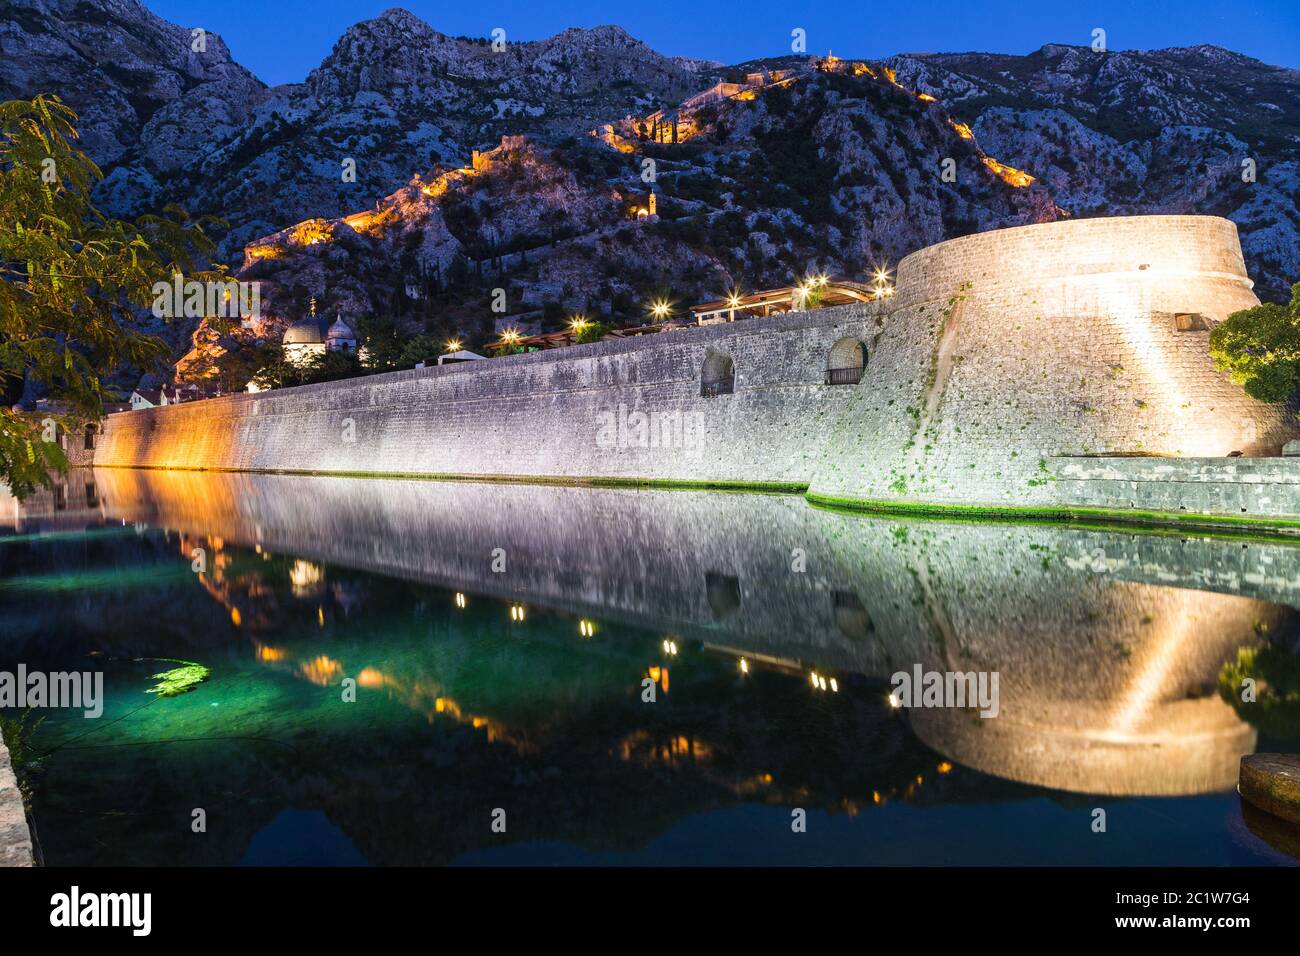 A view of the Kotor Fortress and Walls from the ground level at night. Lights can be seen. Stock Photo